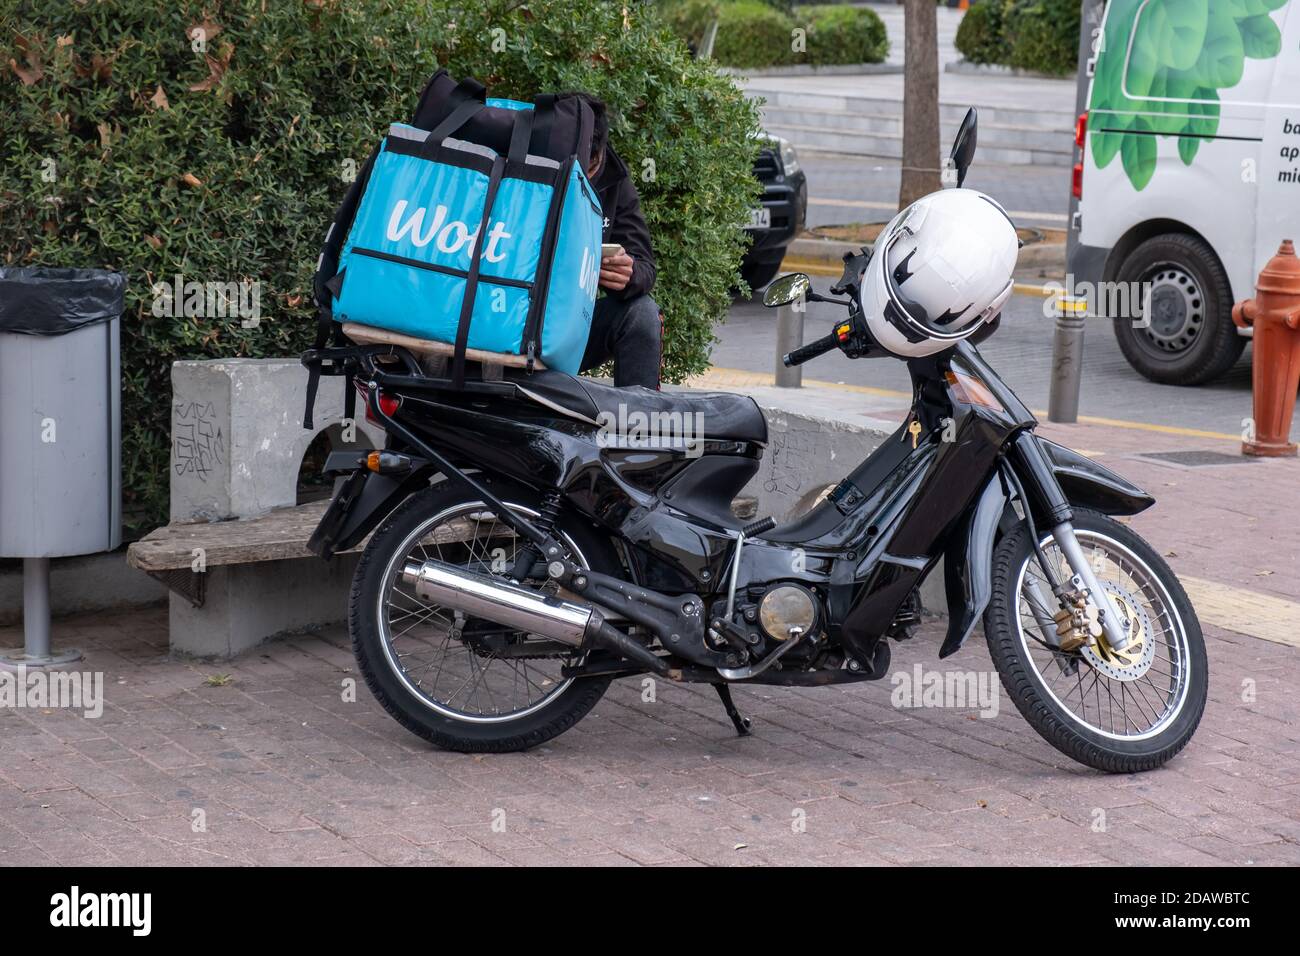 Athens, Greece. November 12, 2020. Wolt food delivery service, courier sitting next to the parked scooter in the city center street Stock Photo